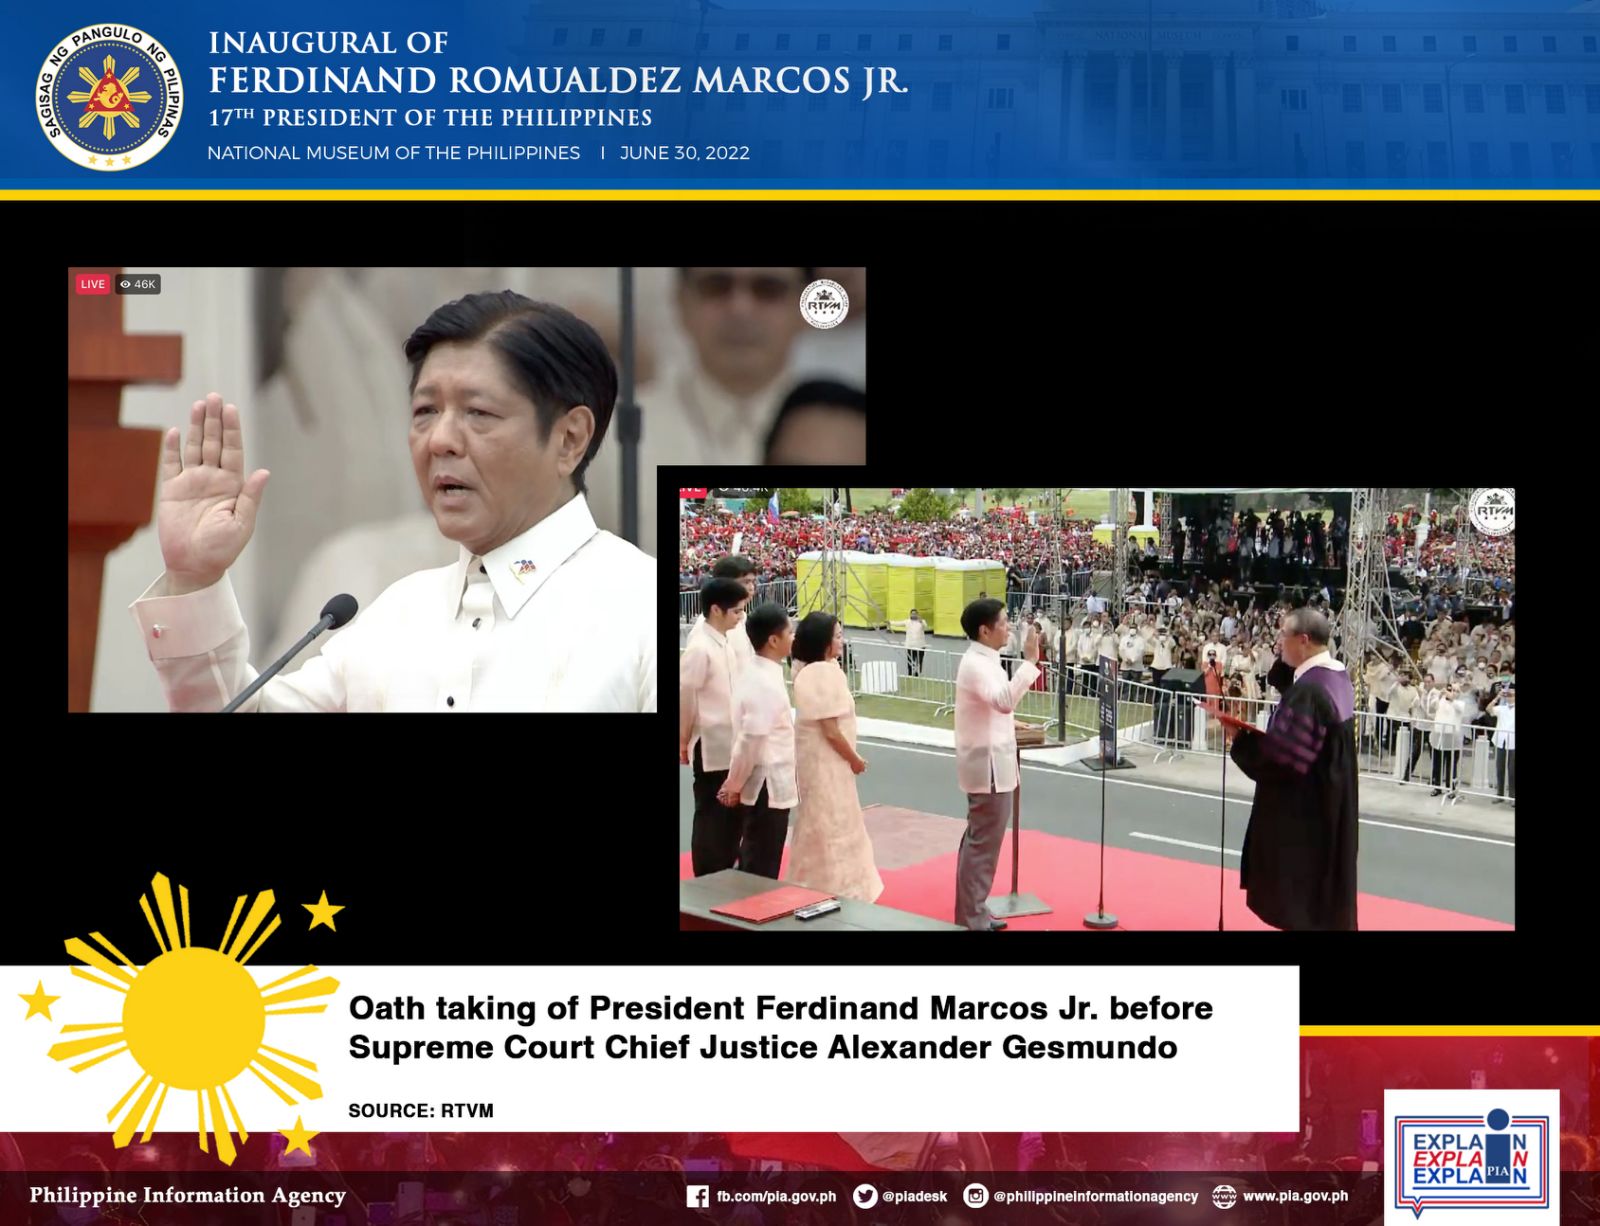 President Ferdinand Marcos Jr. takes his oath as the 17th President of the Philippines